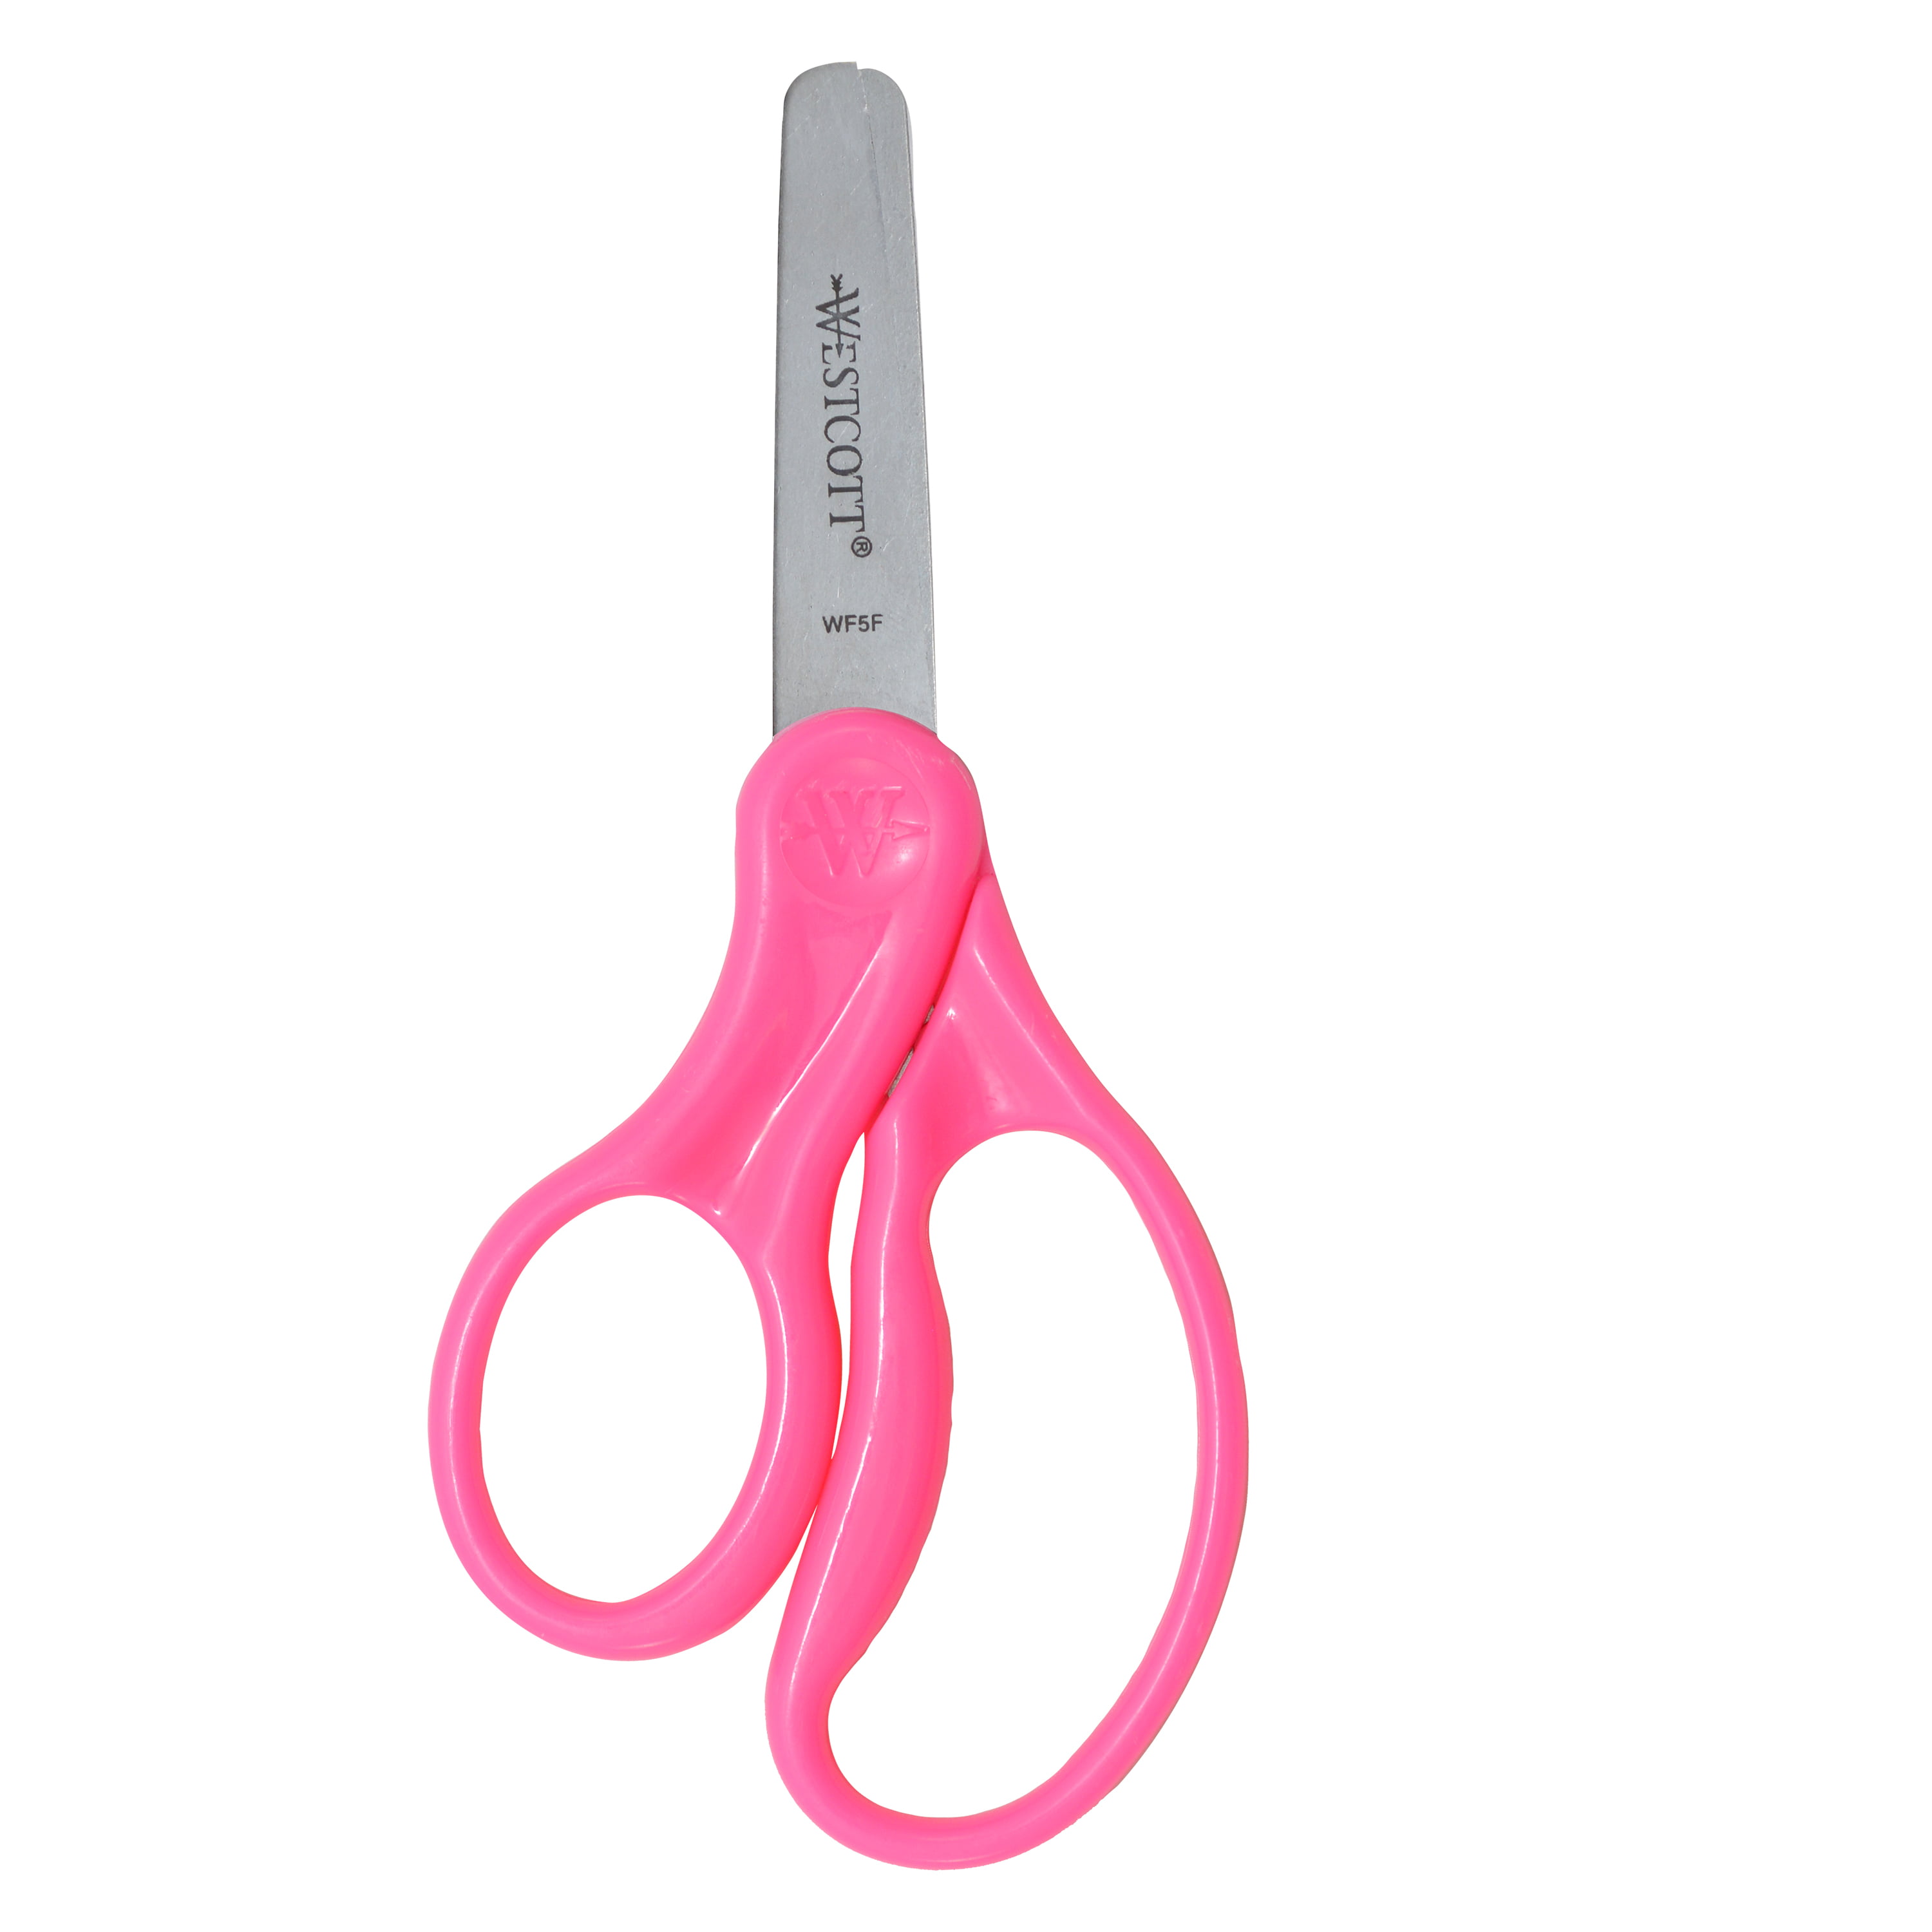 Maped Essential 5 Kid Scissors Blunt - carded - MAP480110, Maped Helix  Usa